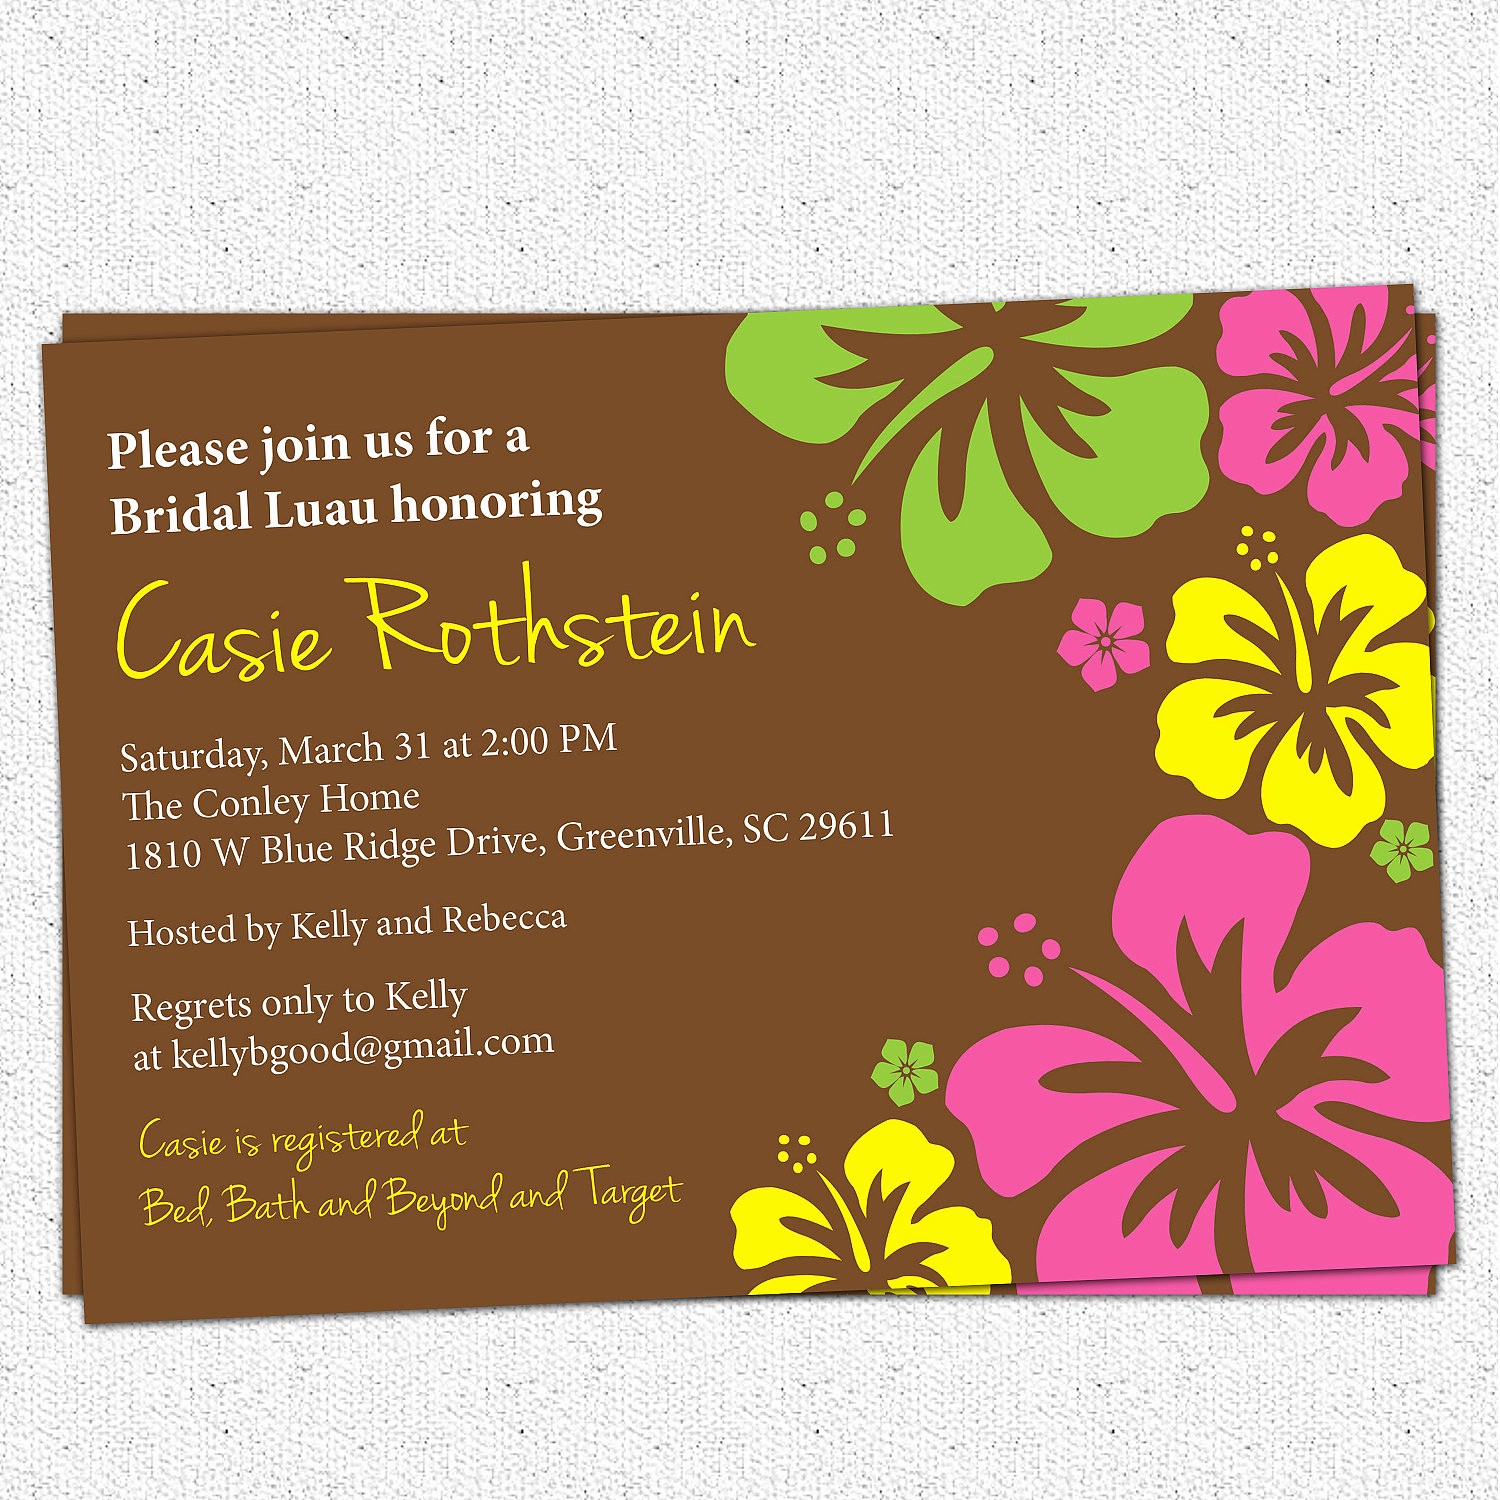 Luau Party Invitations Templates Free Unique Others Custom Luau Invitations for Your Tropical Getaway